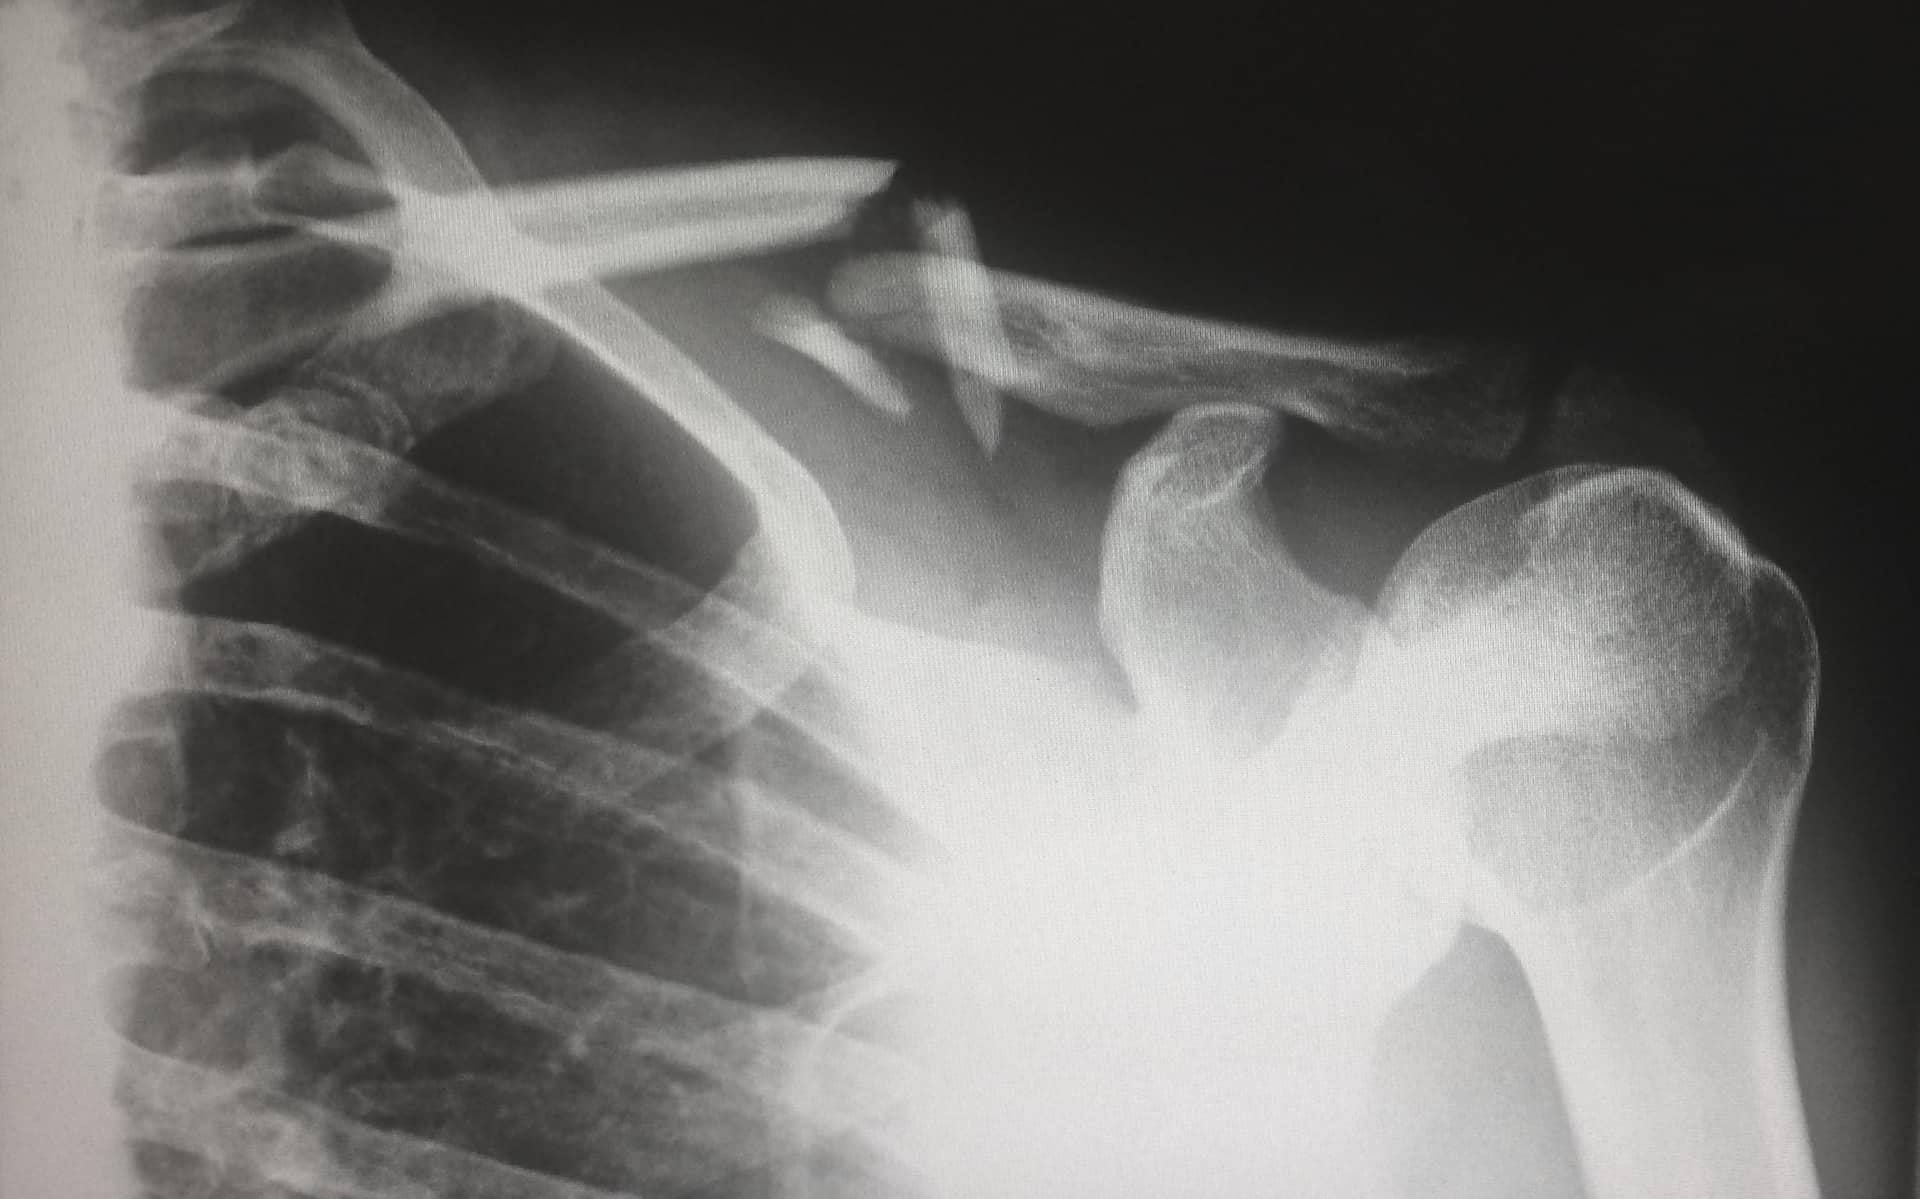 clavicle bone fracture